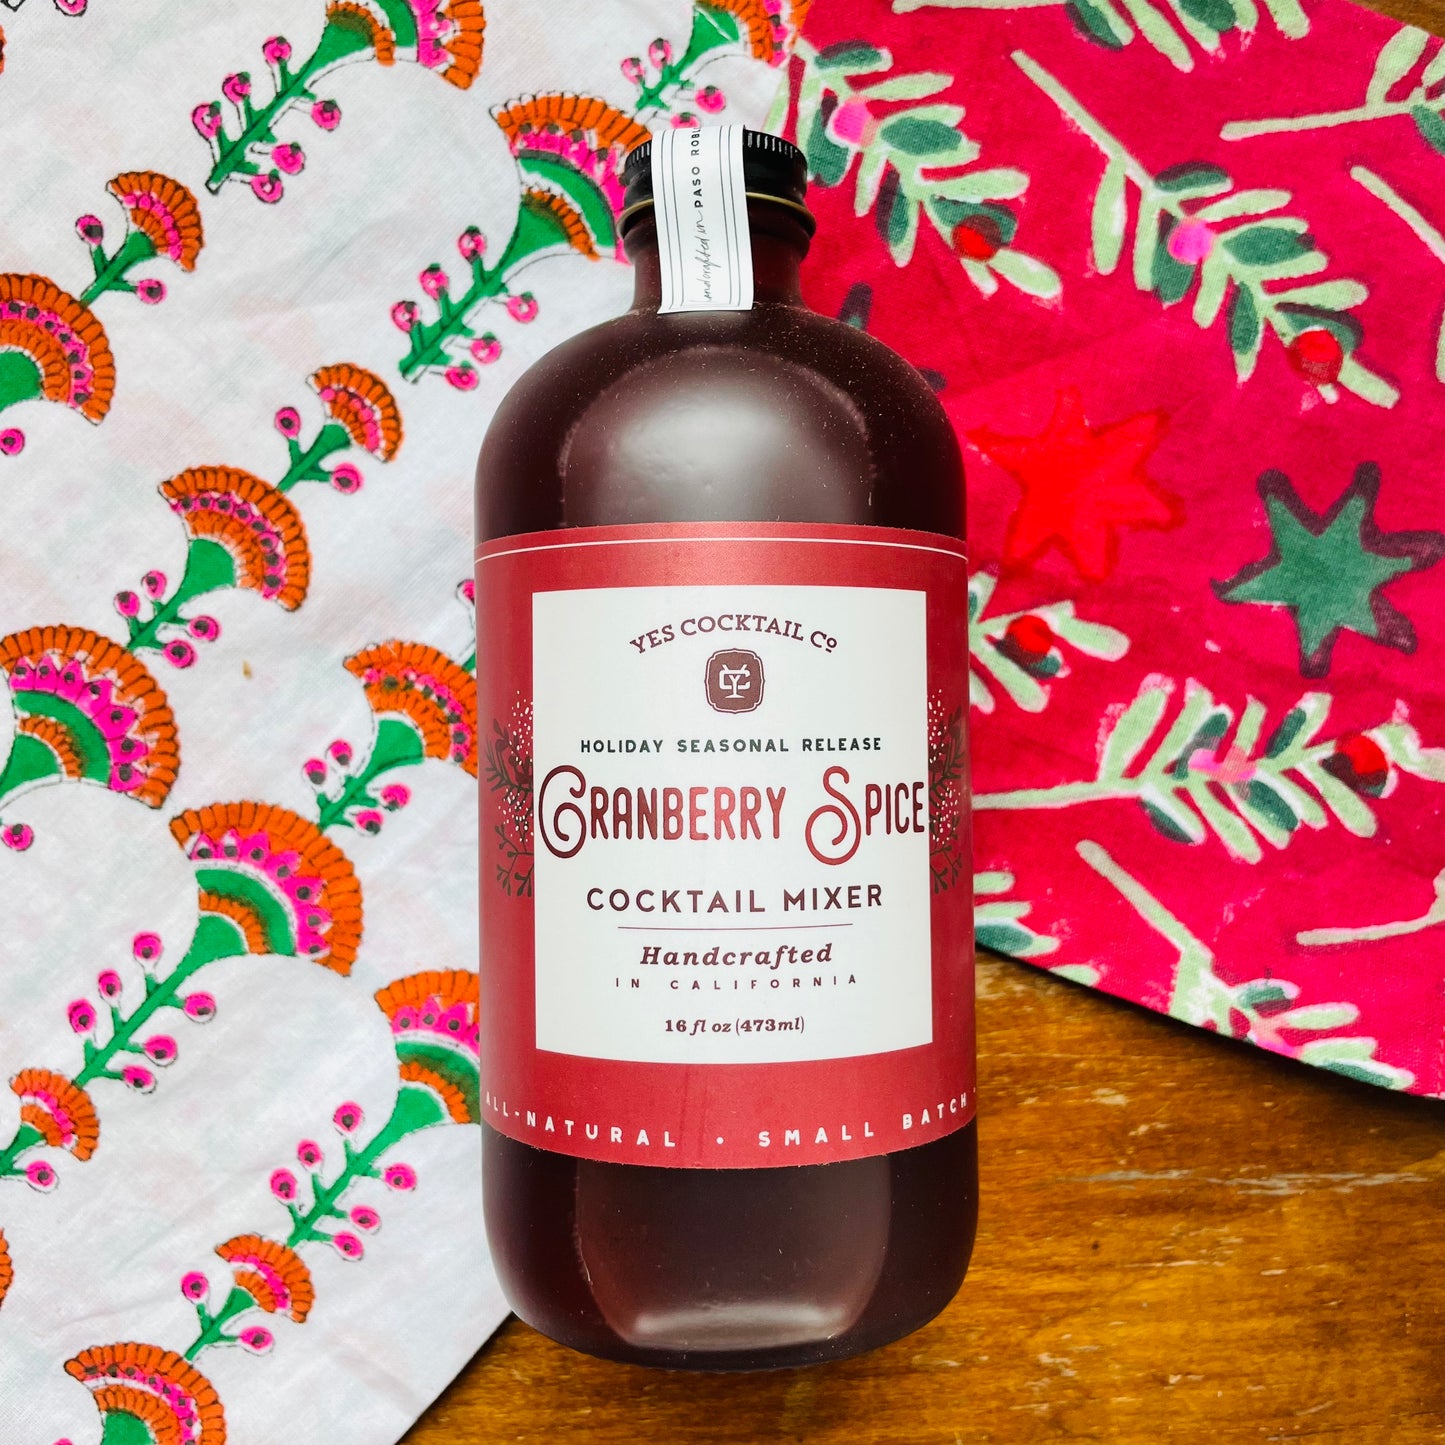 Cranberry Spice Cocktail Mixer- Yes Cocktail Co.